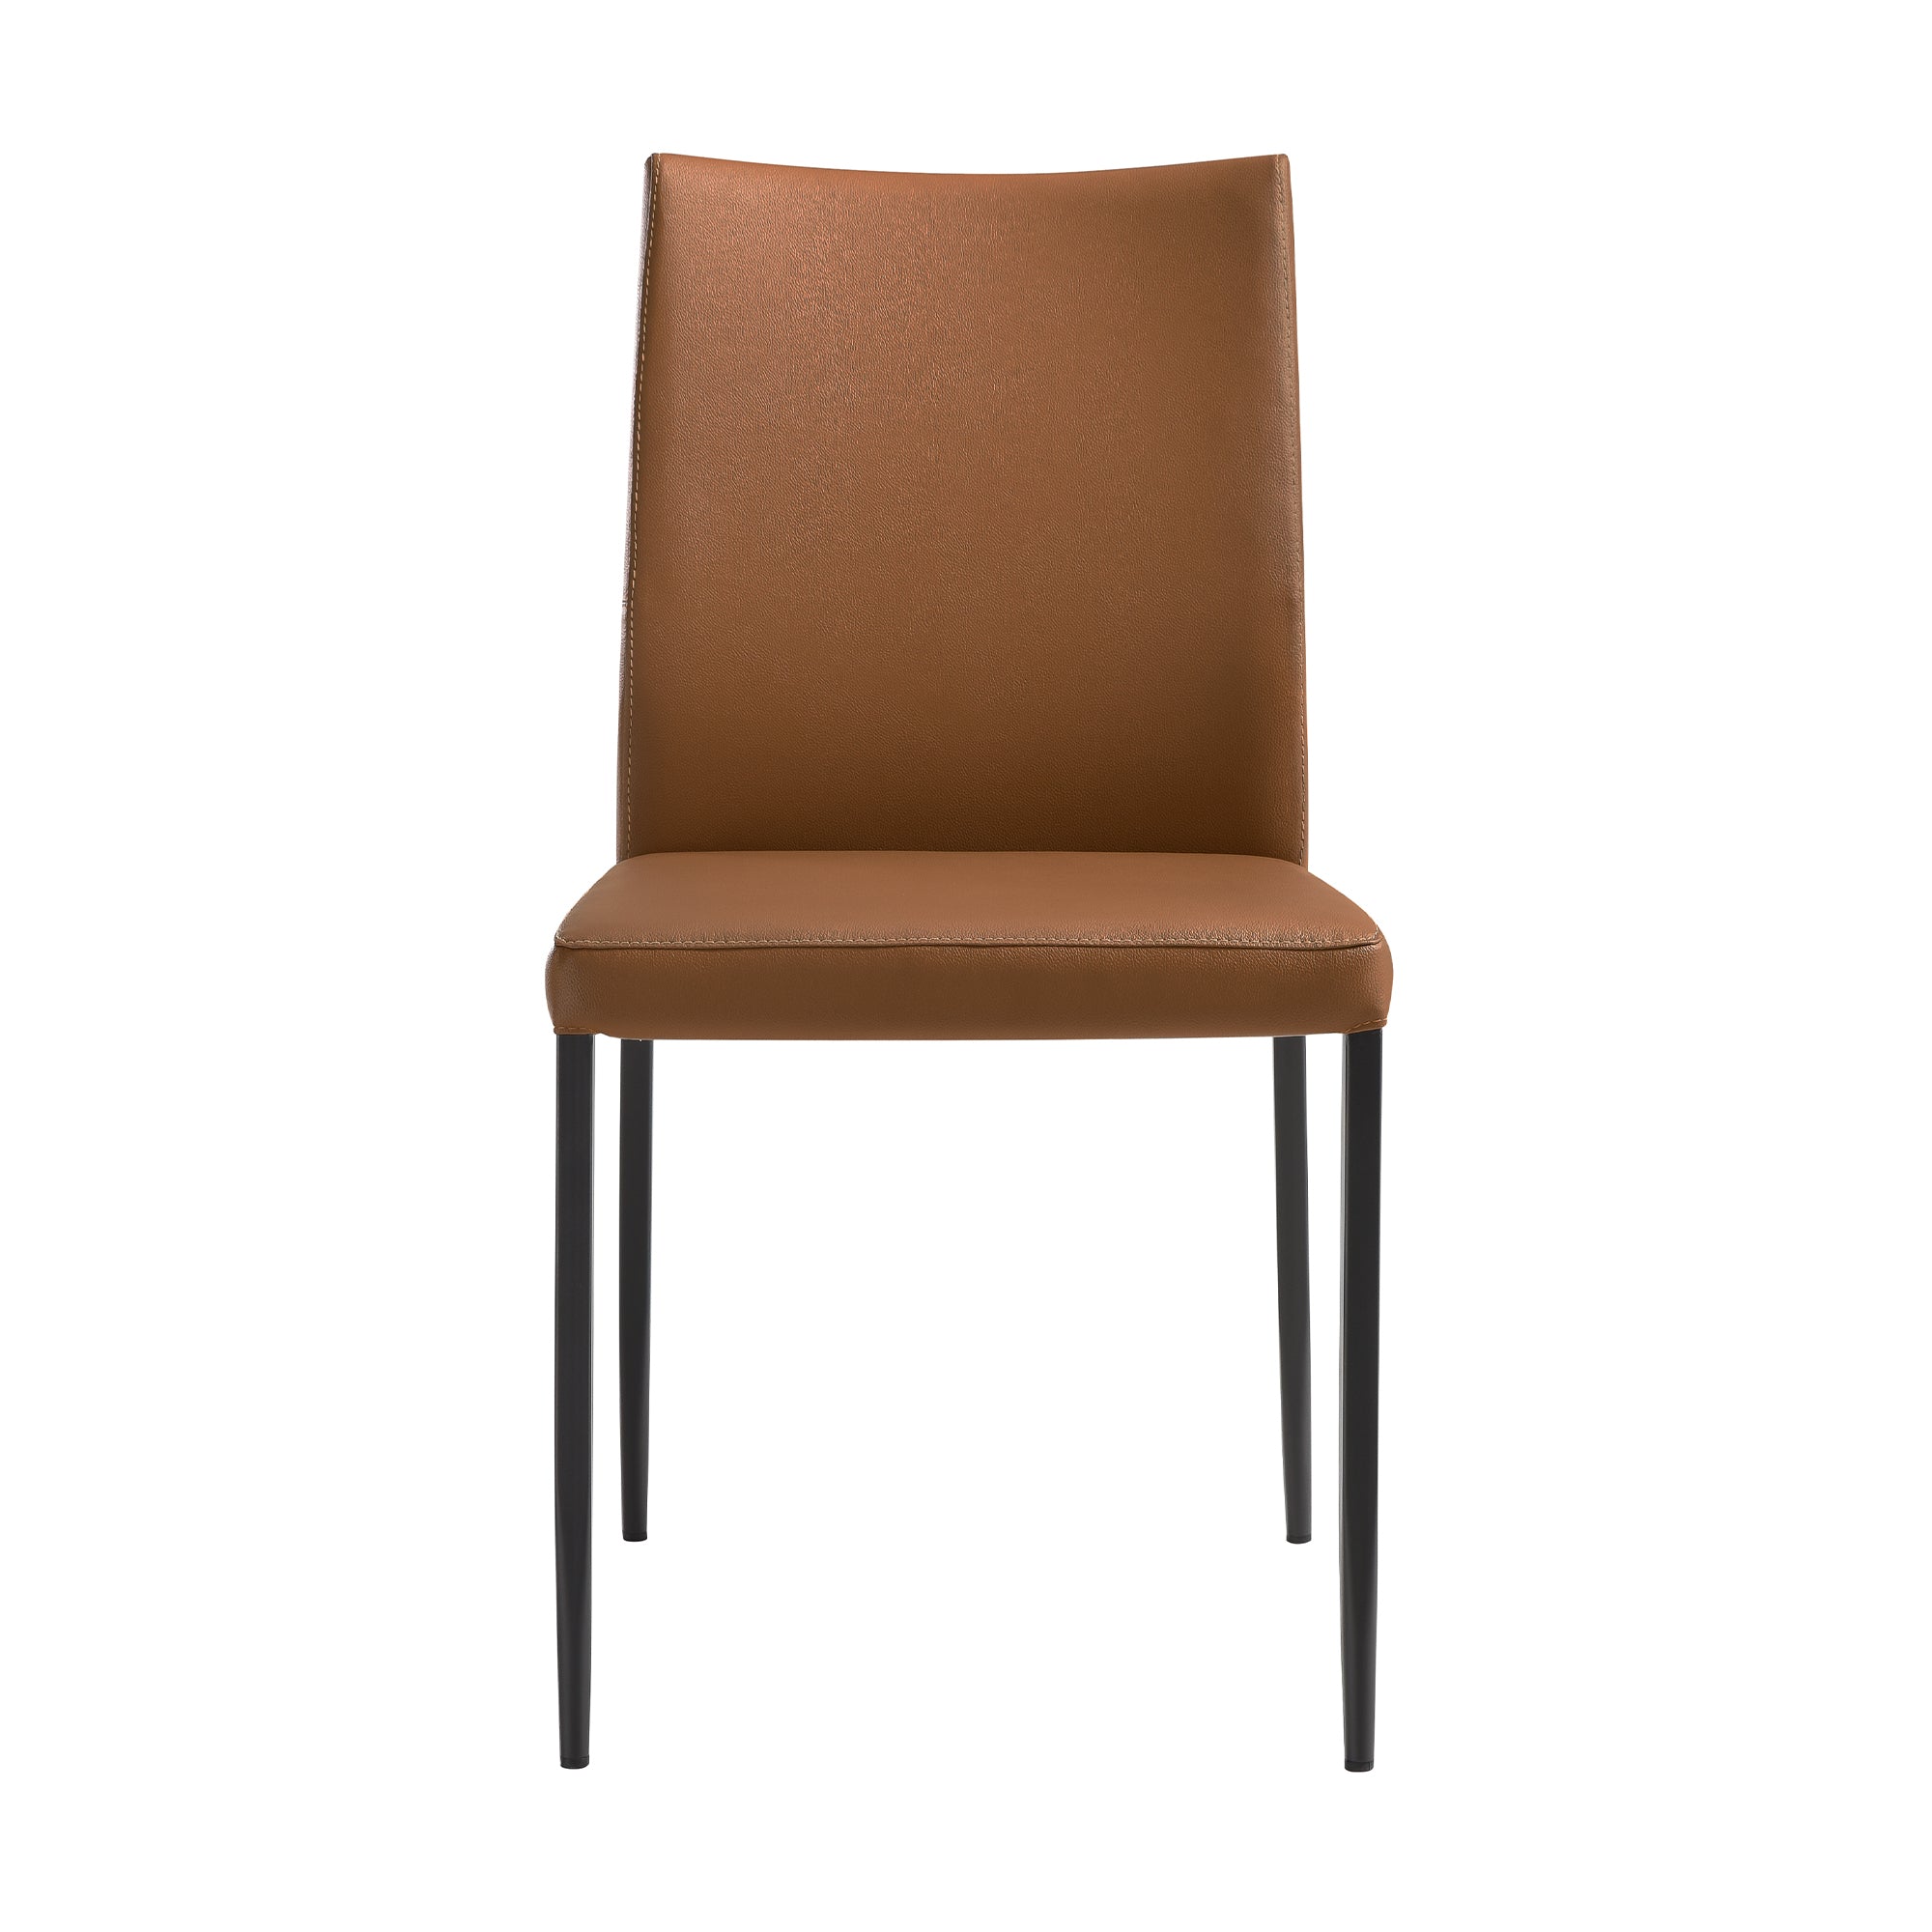 Kash Upholstered Dining Chair in Brown Faux Leather with Black Metal Legs - Set of 2 By Armen Living